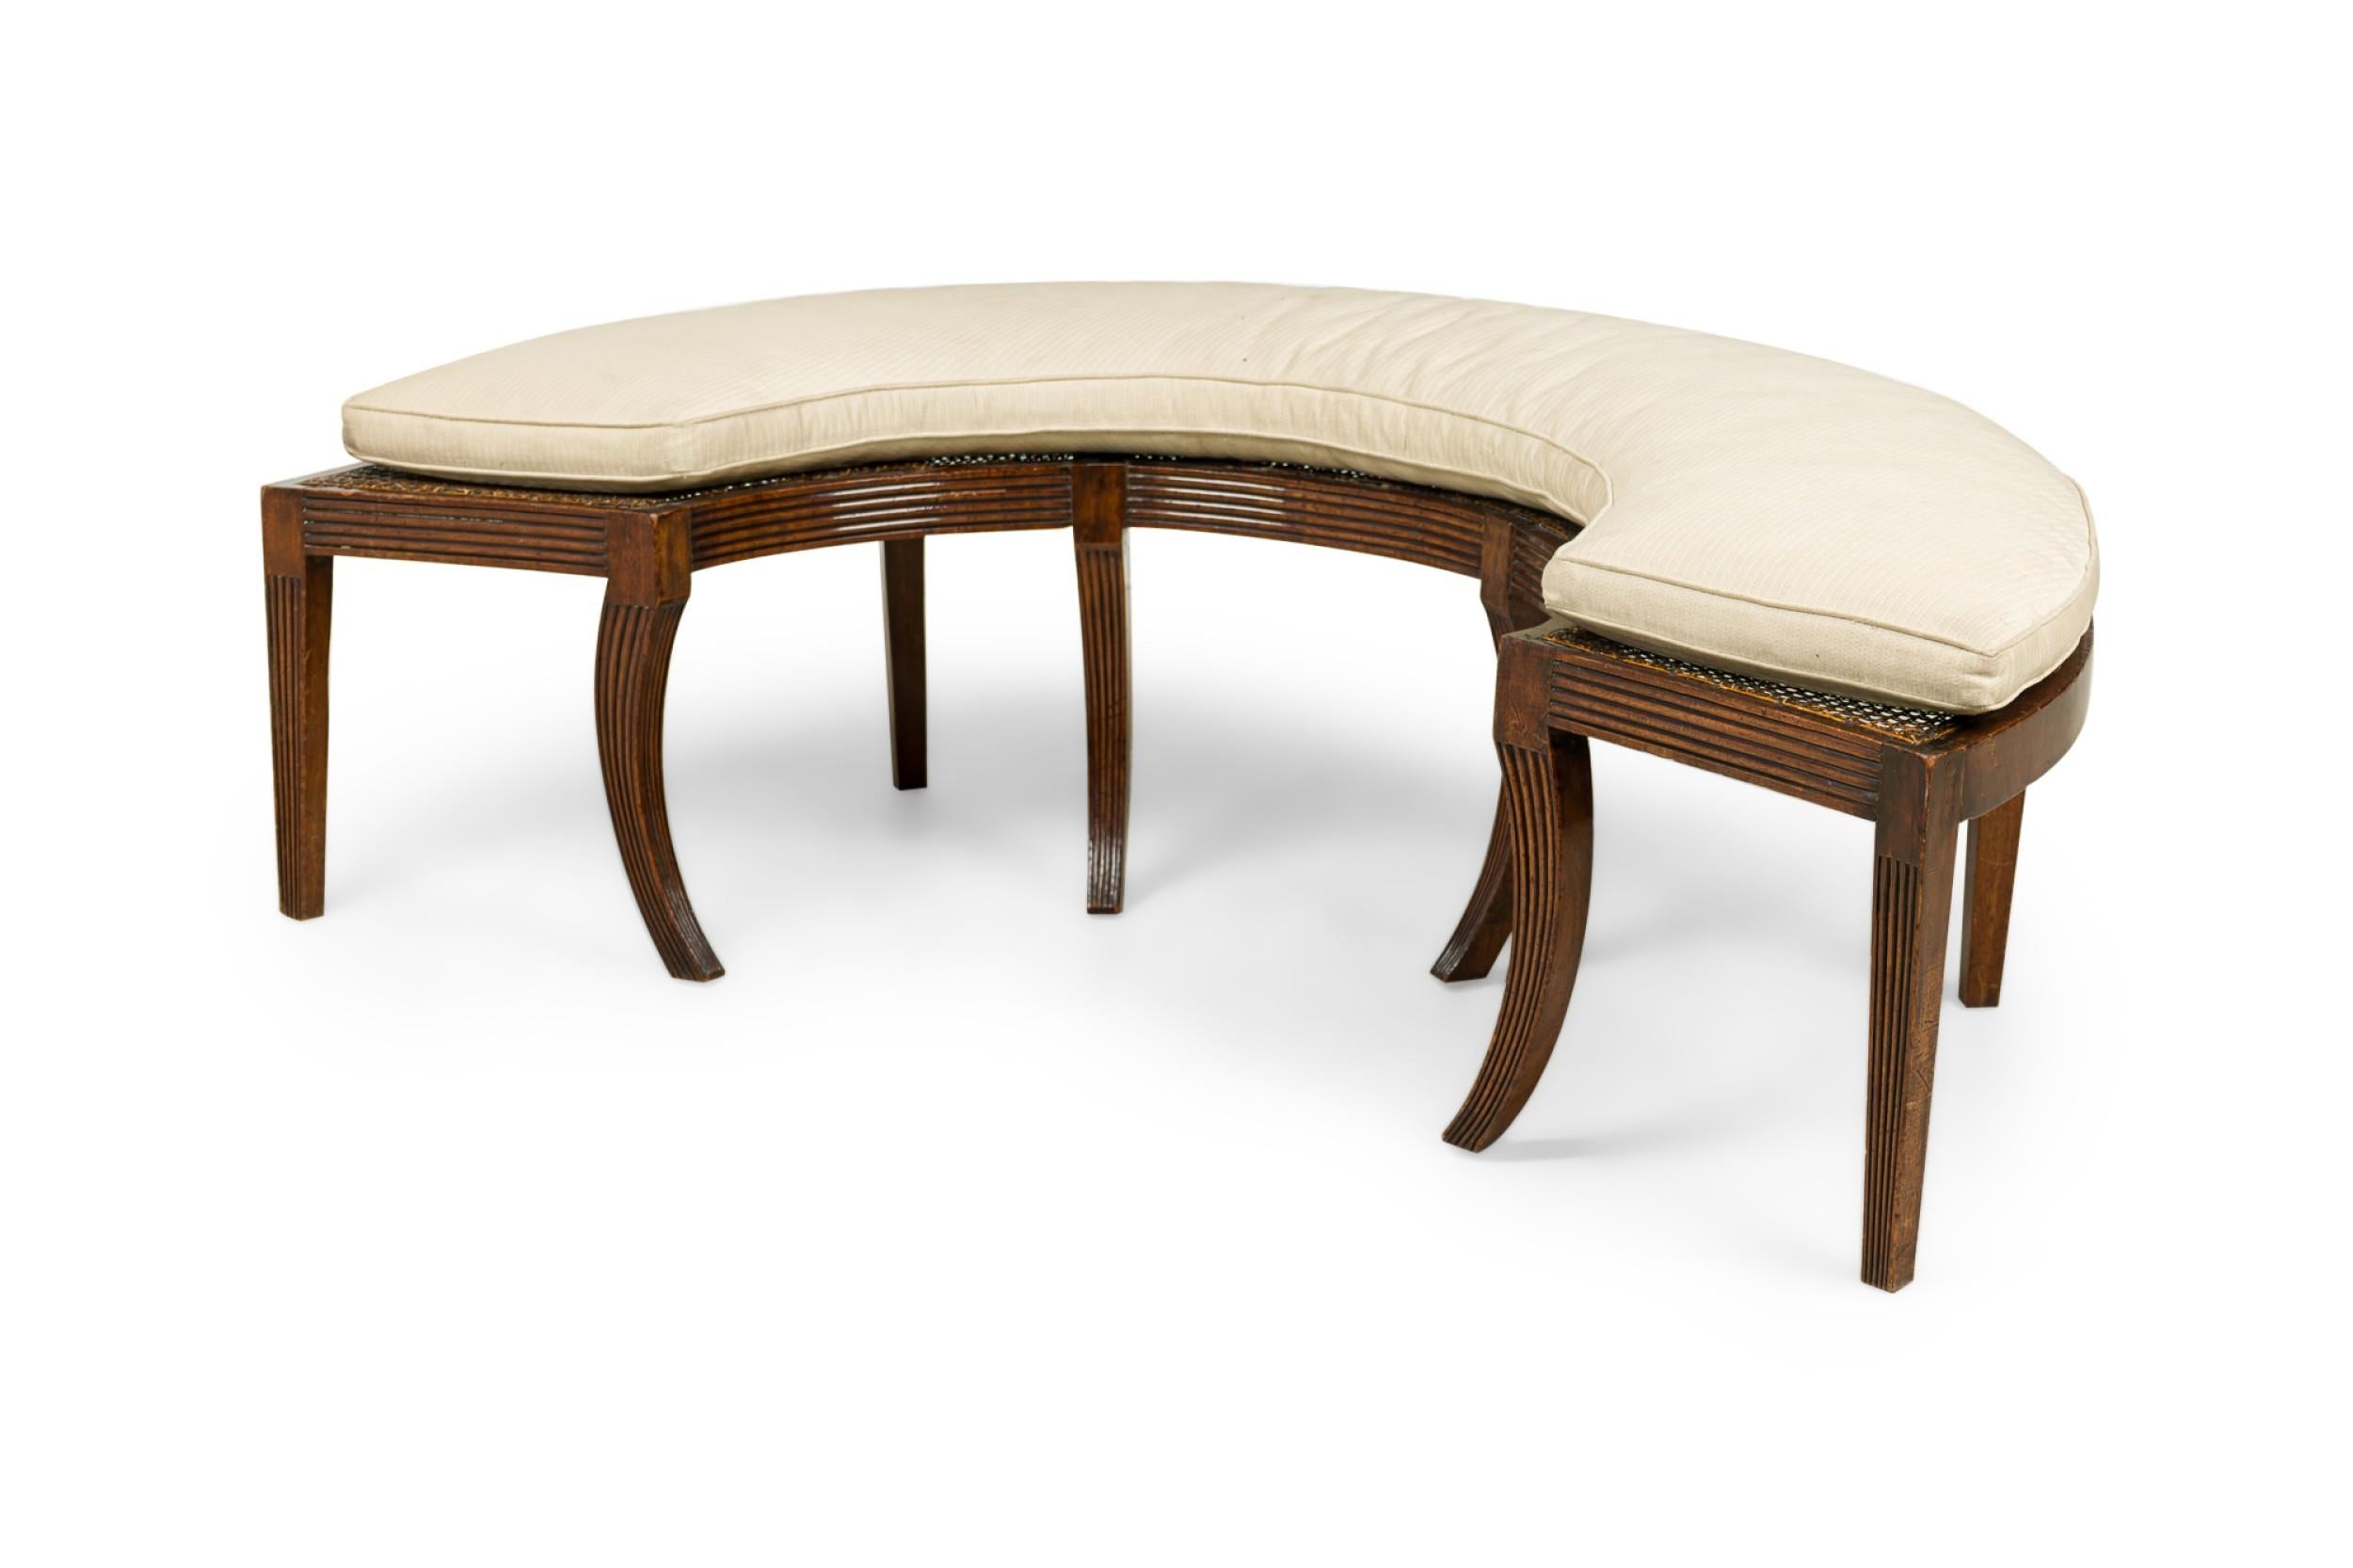 English Regency semi-circular bench with a mahogany frame and caned top, supporting a taupe / brown fabric upholstered seat cushion, resting on 5 square and 4 sabre mahogany legs.
